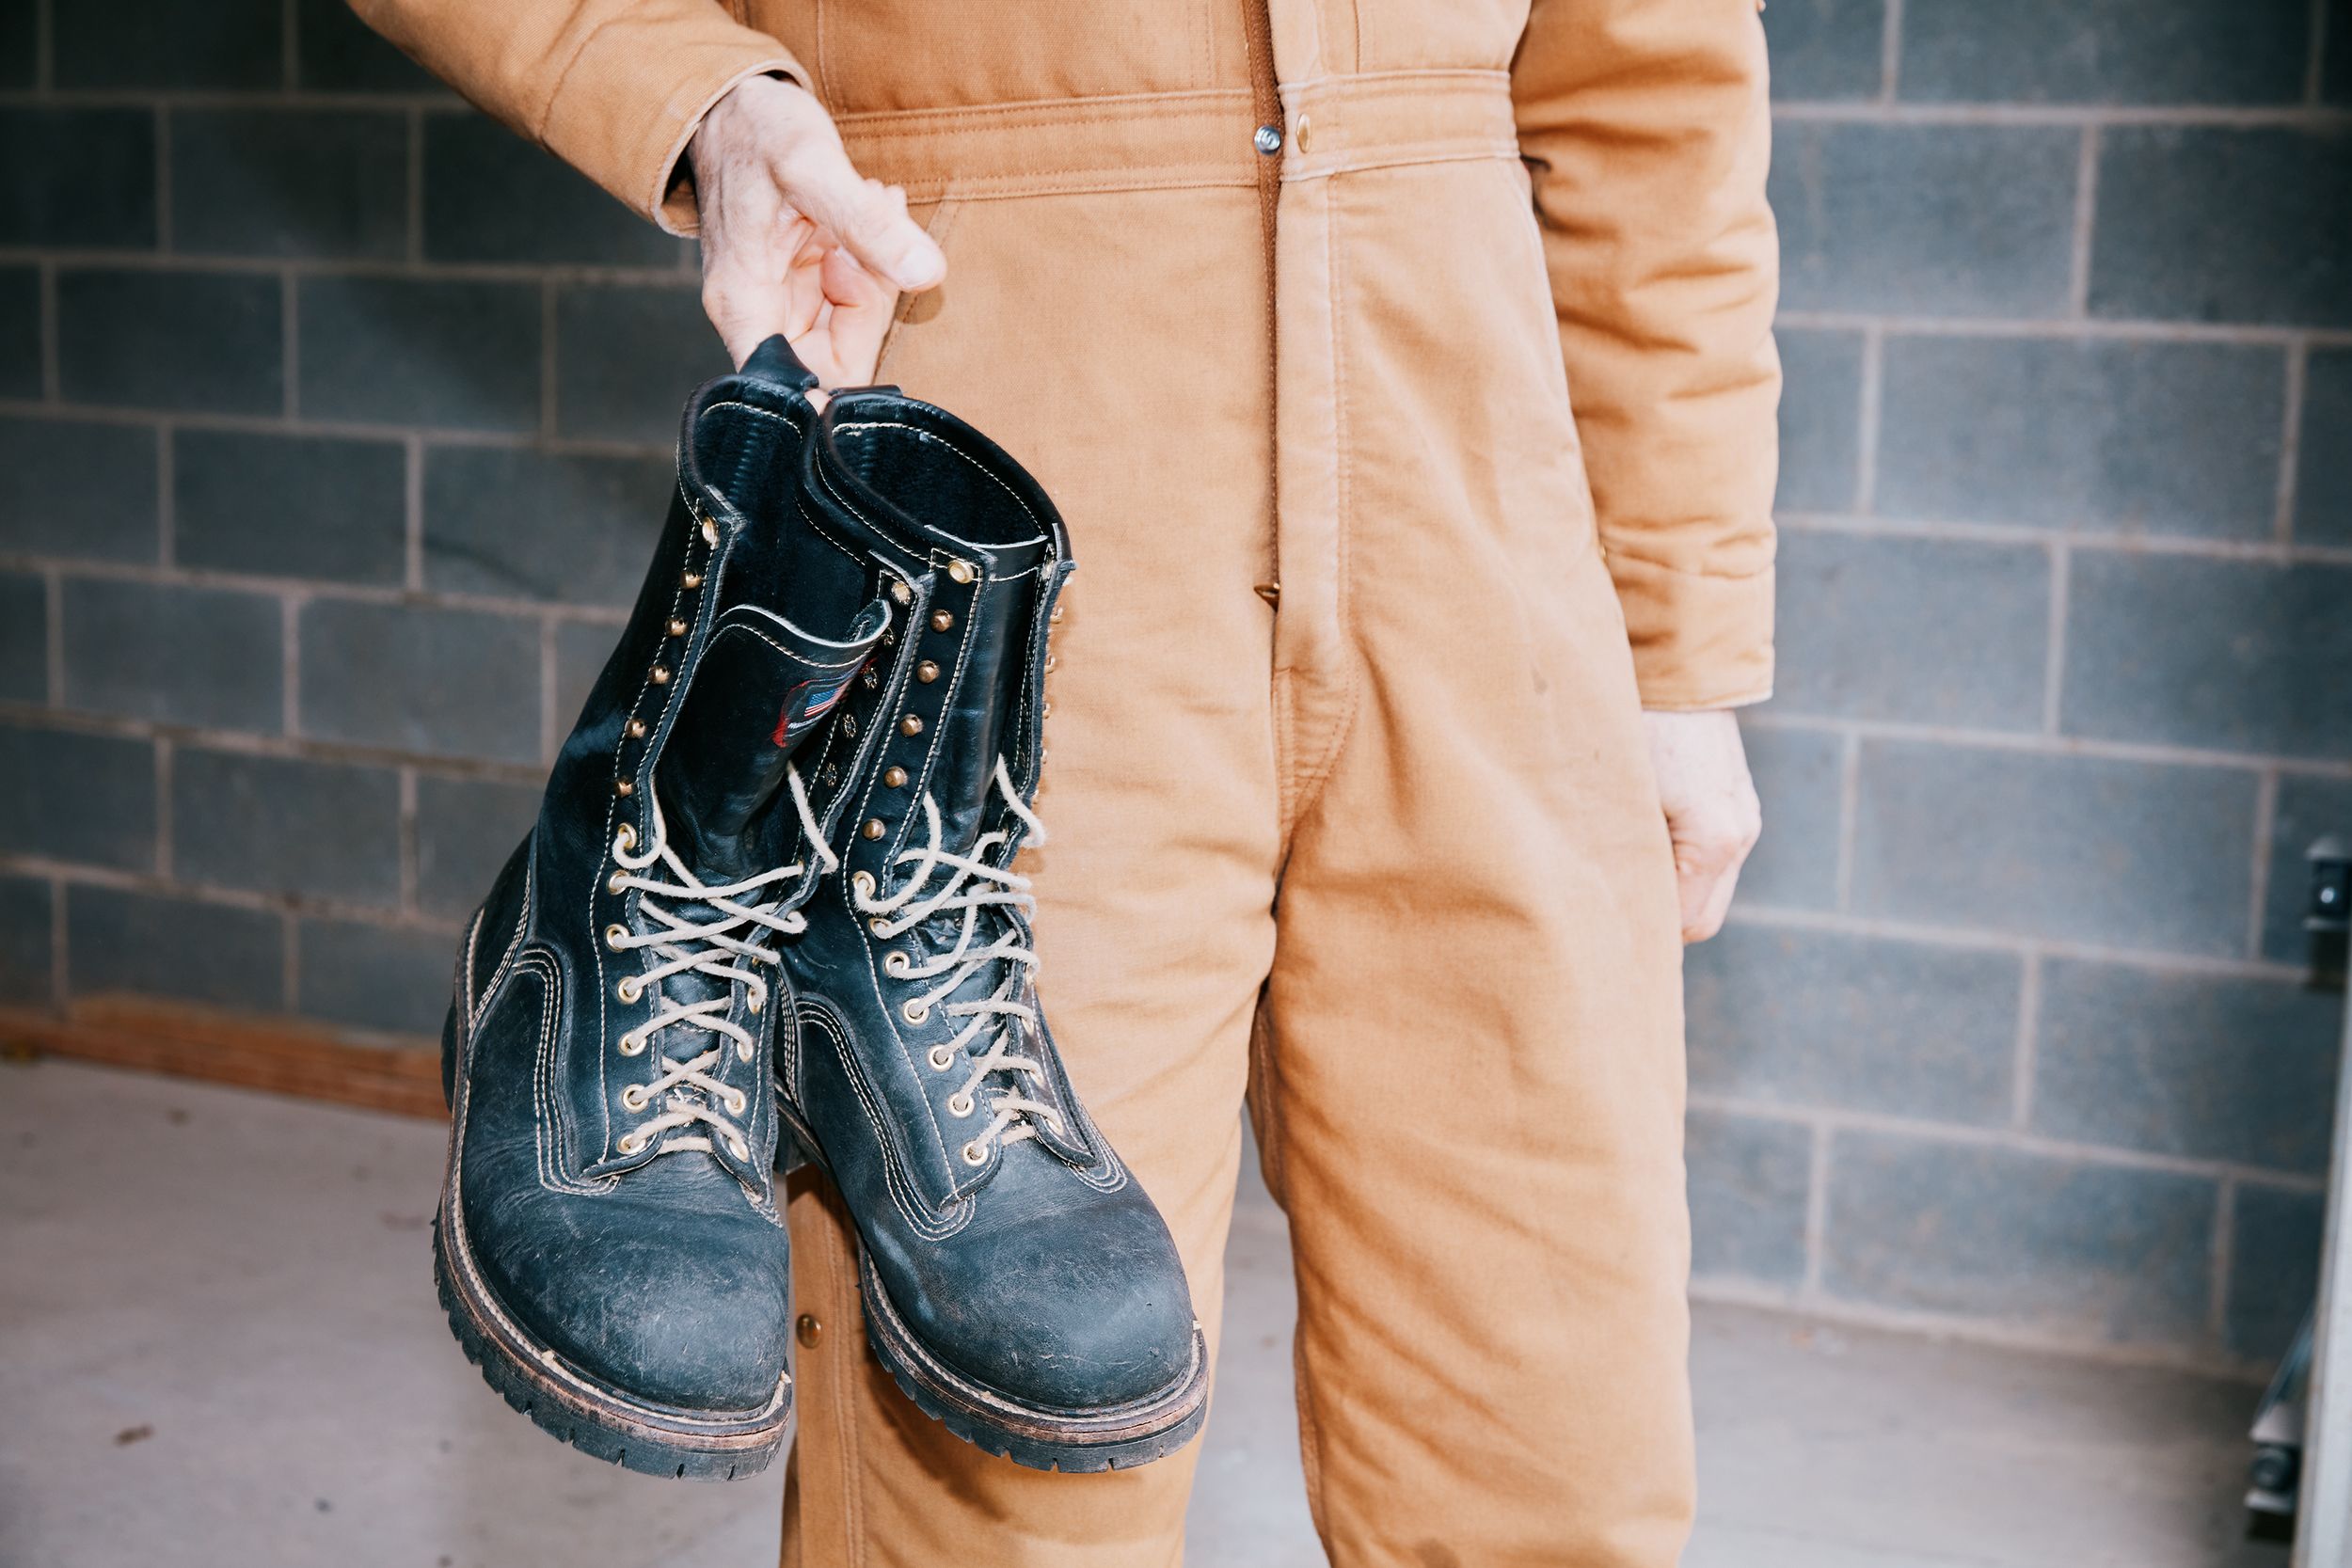 8 of the Best Tactical Boots for Outdoor Enthusiasts and Professionals